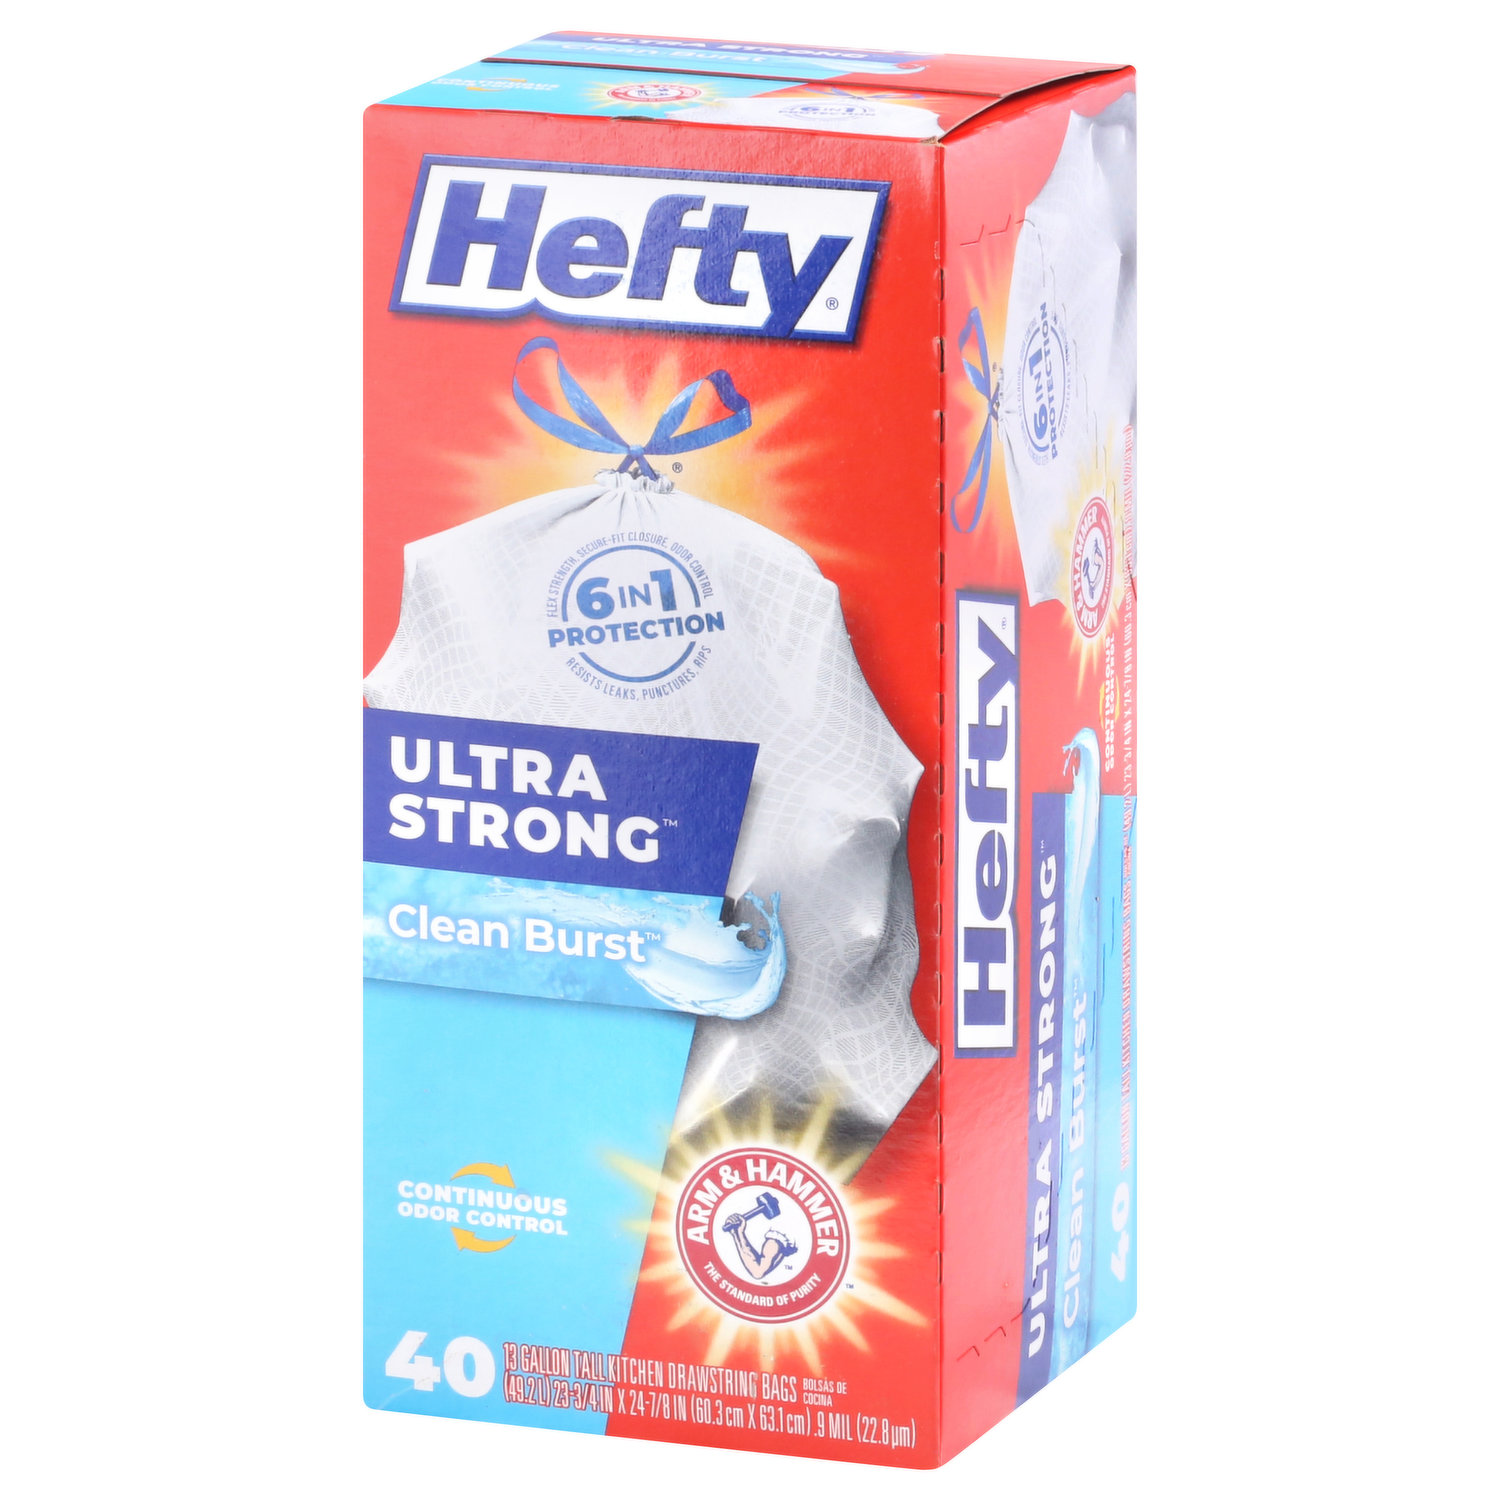 Hefty Ultra Strong Tall Kitchen Trash Bags, NEW! Fabuloso Scent, 13 Gallon,  80 Count 